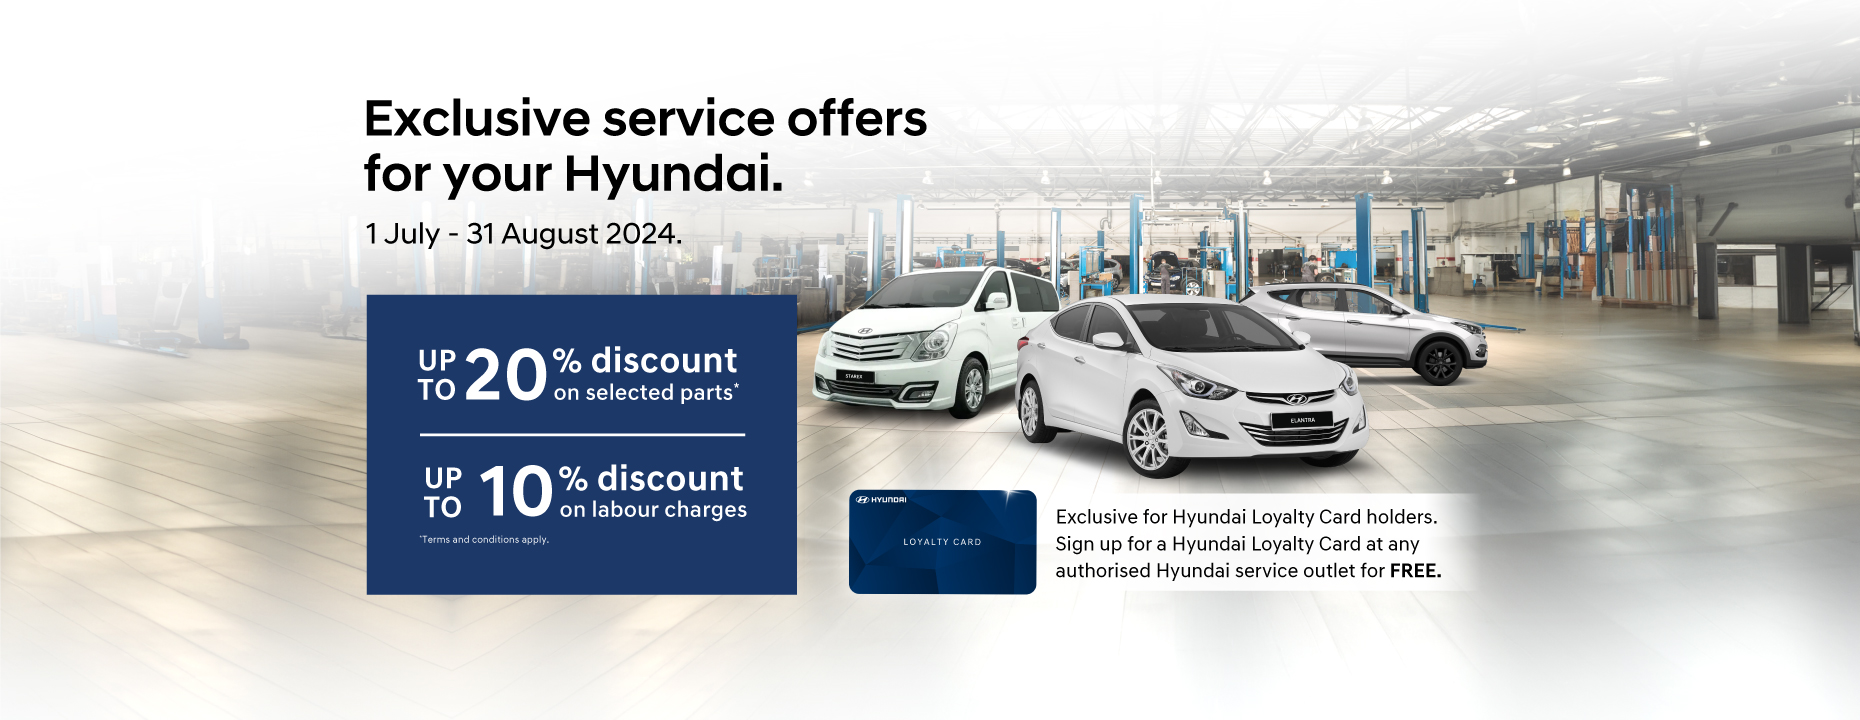 Exclusive service offers for your Hyundai.